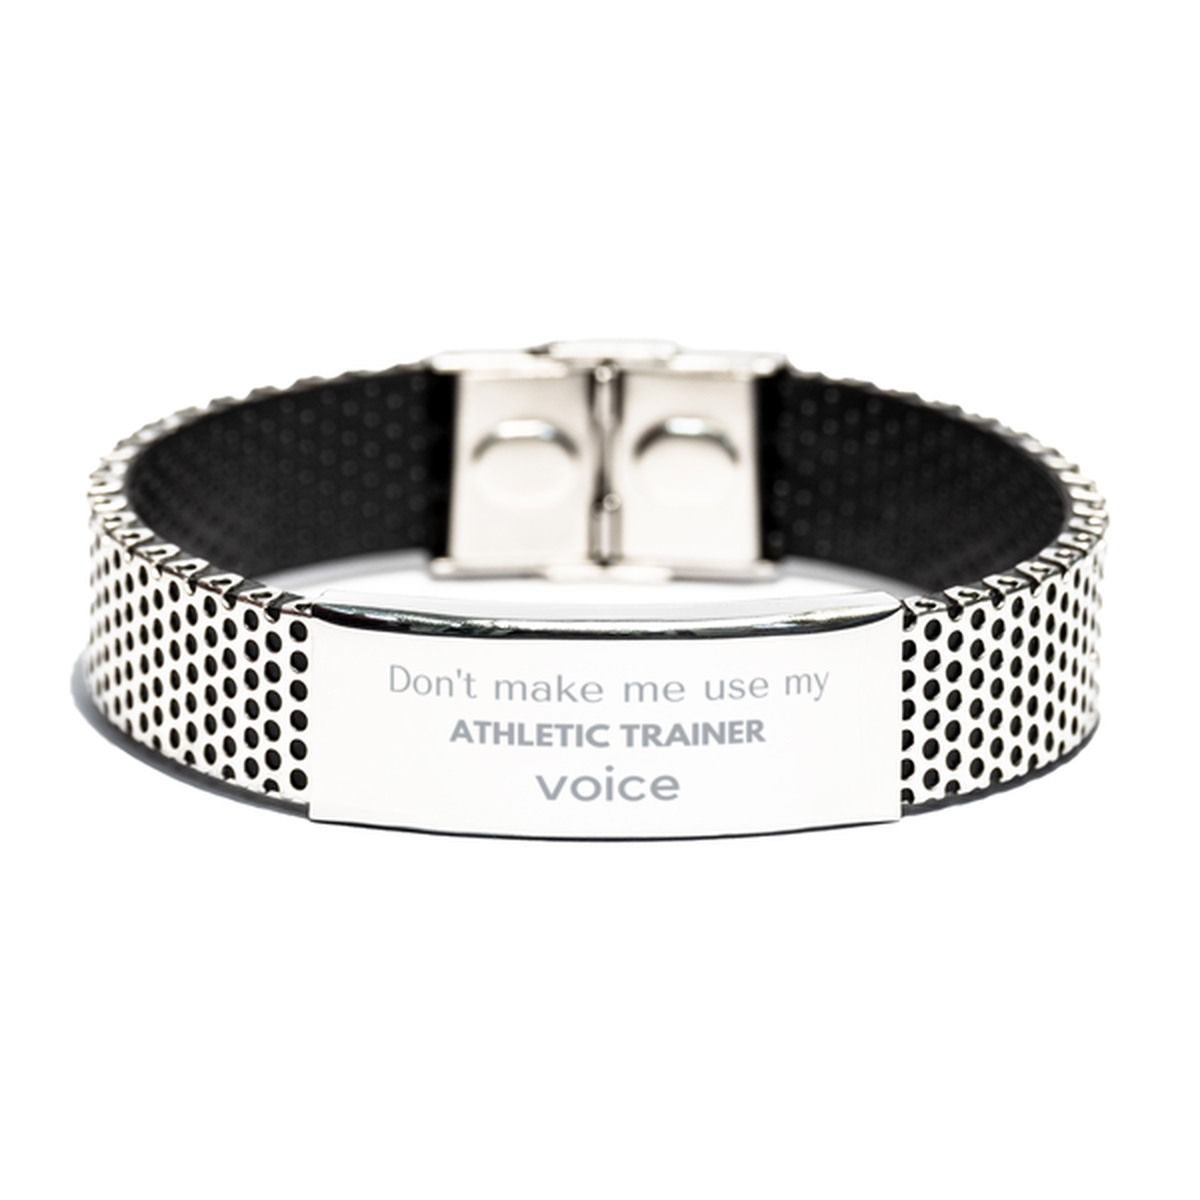 Don't make me use my Athletic Trainer voice, Sarcasm Athletic Trainer Gifts, Christmas Athletic Trainer Stainless Steel Bracelet Birthday Unique Gifts For Athletic Trainer Coworkers, Men, Women, Colleague, Friends